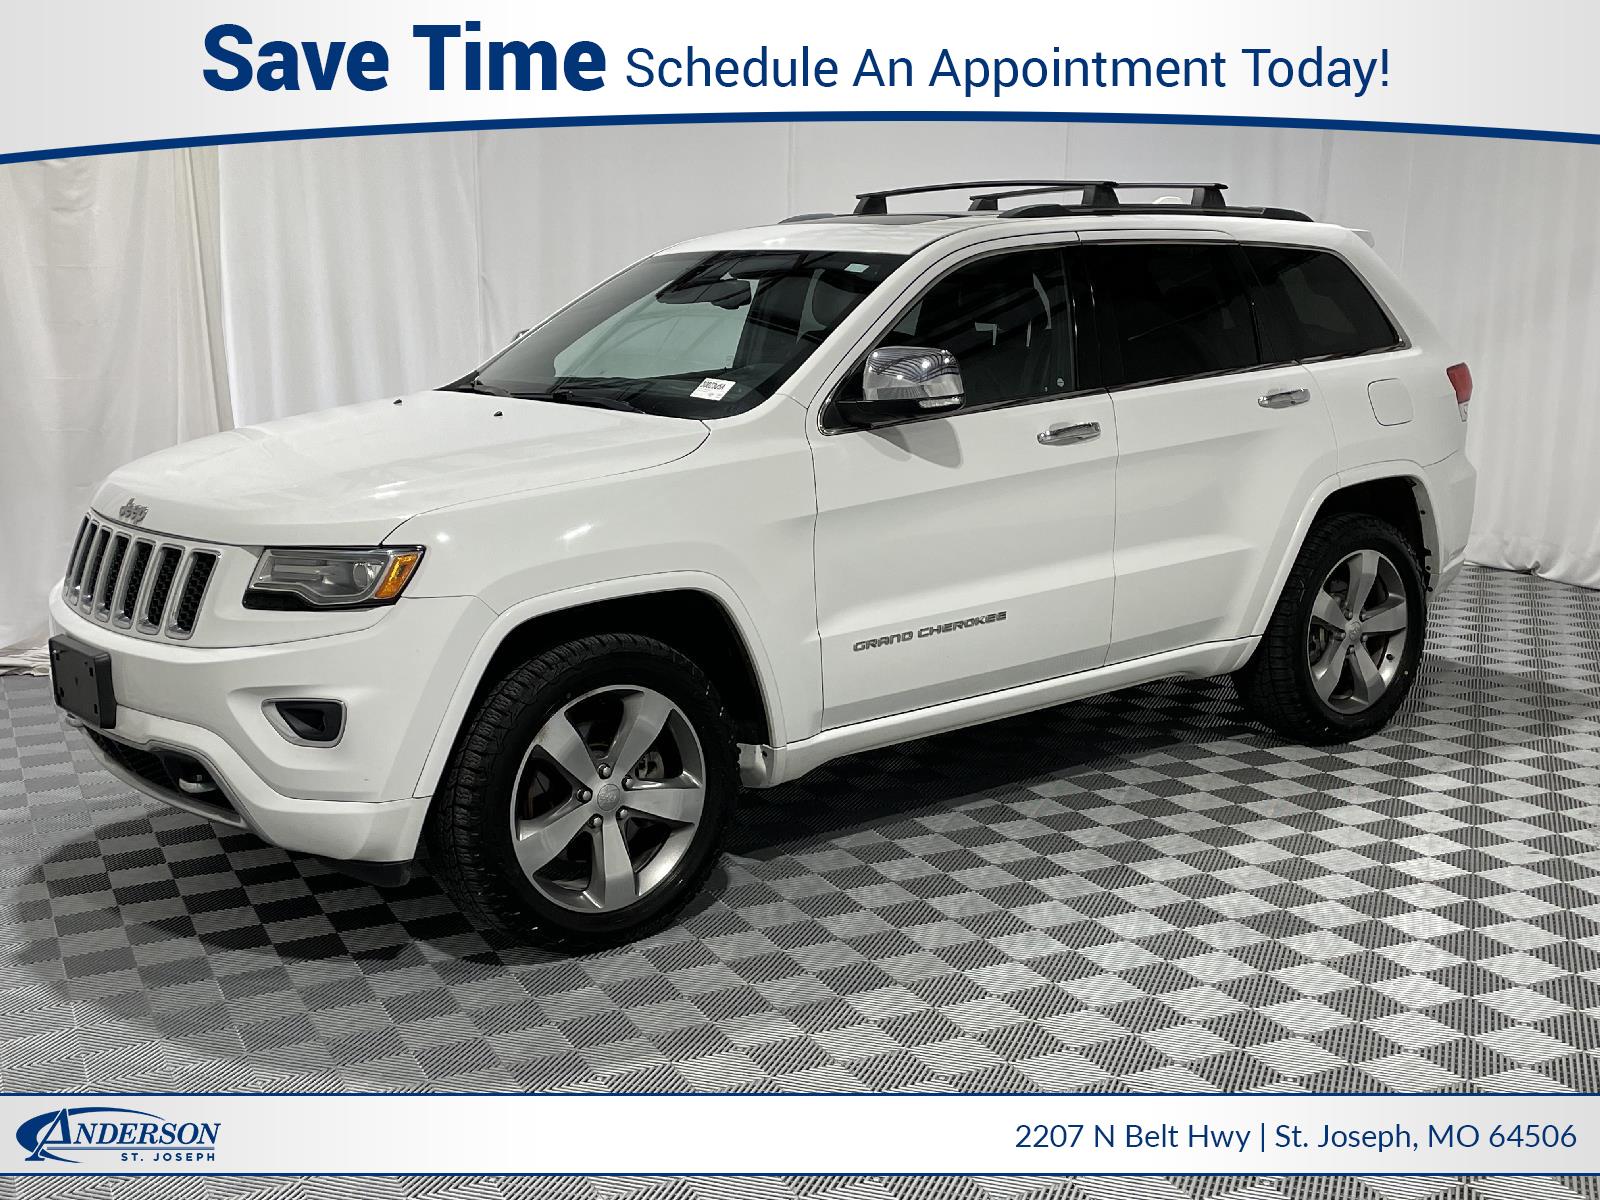 Used 2014 Jeep Grand Cherokee Overland Stock: 3002305A